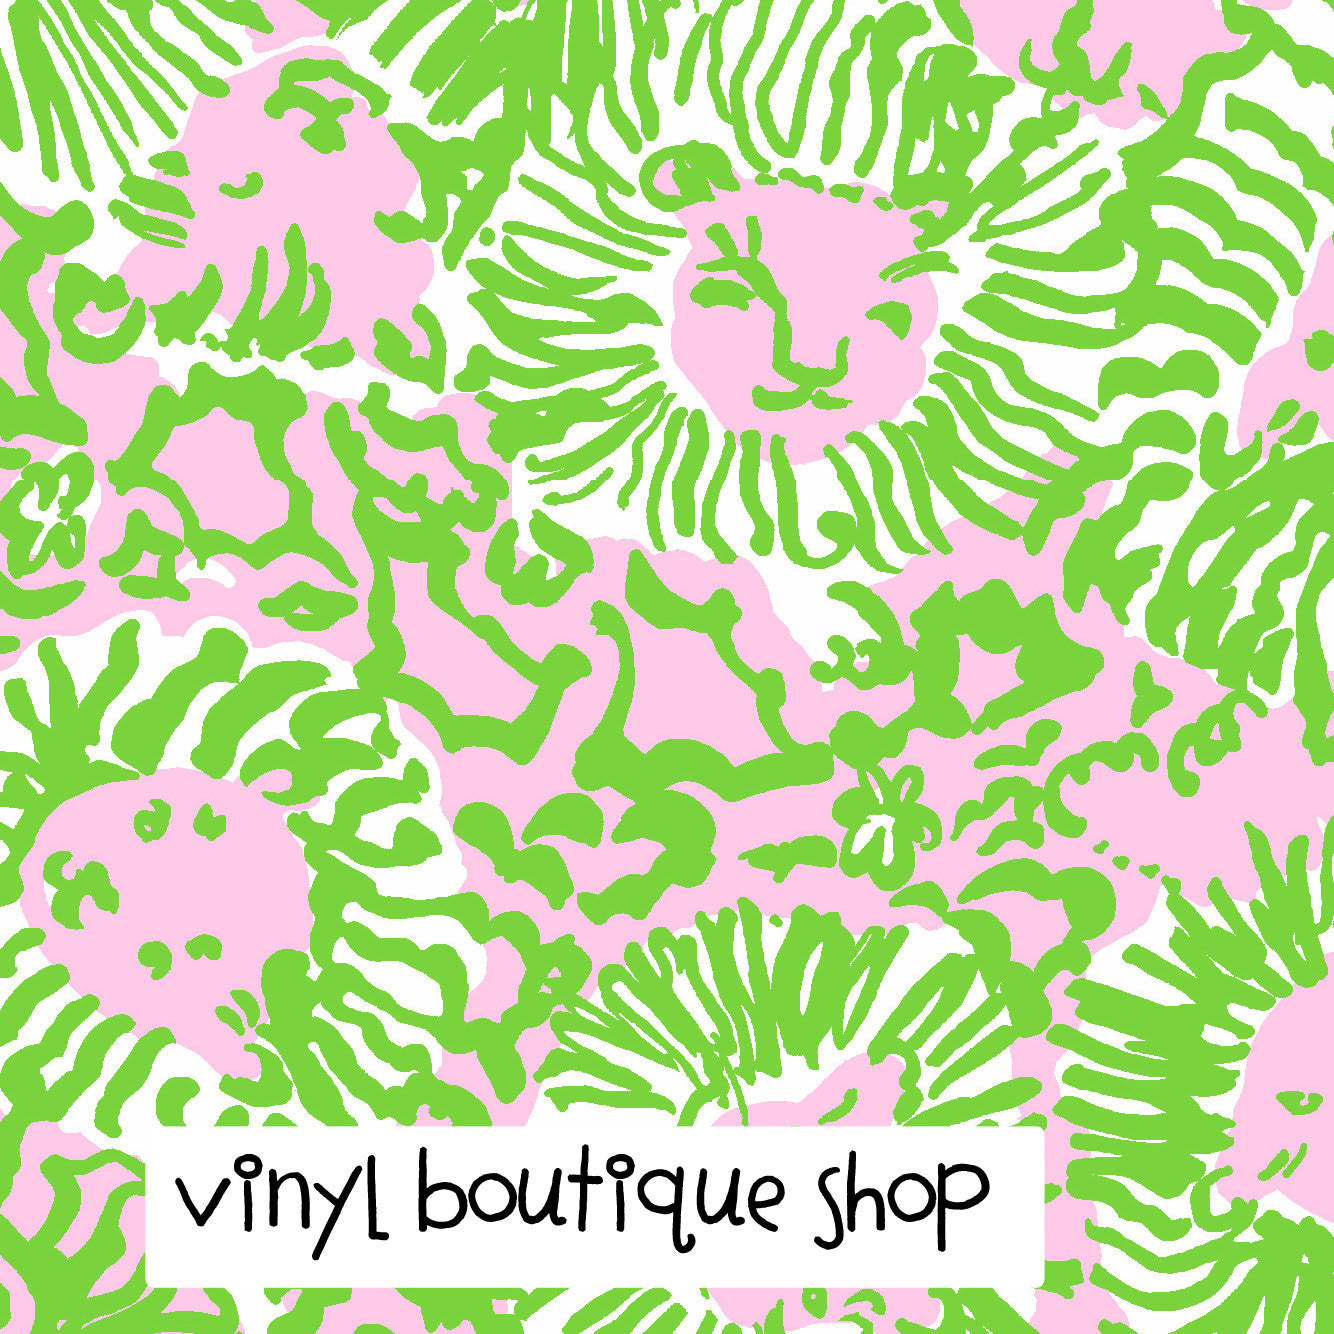 Sunnyside Green Lilly Inspired Printed Patterned Craft Vinyl - Vinyl Boutique Shop